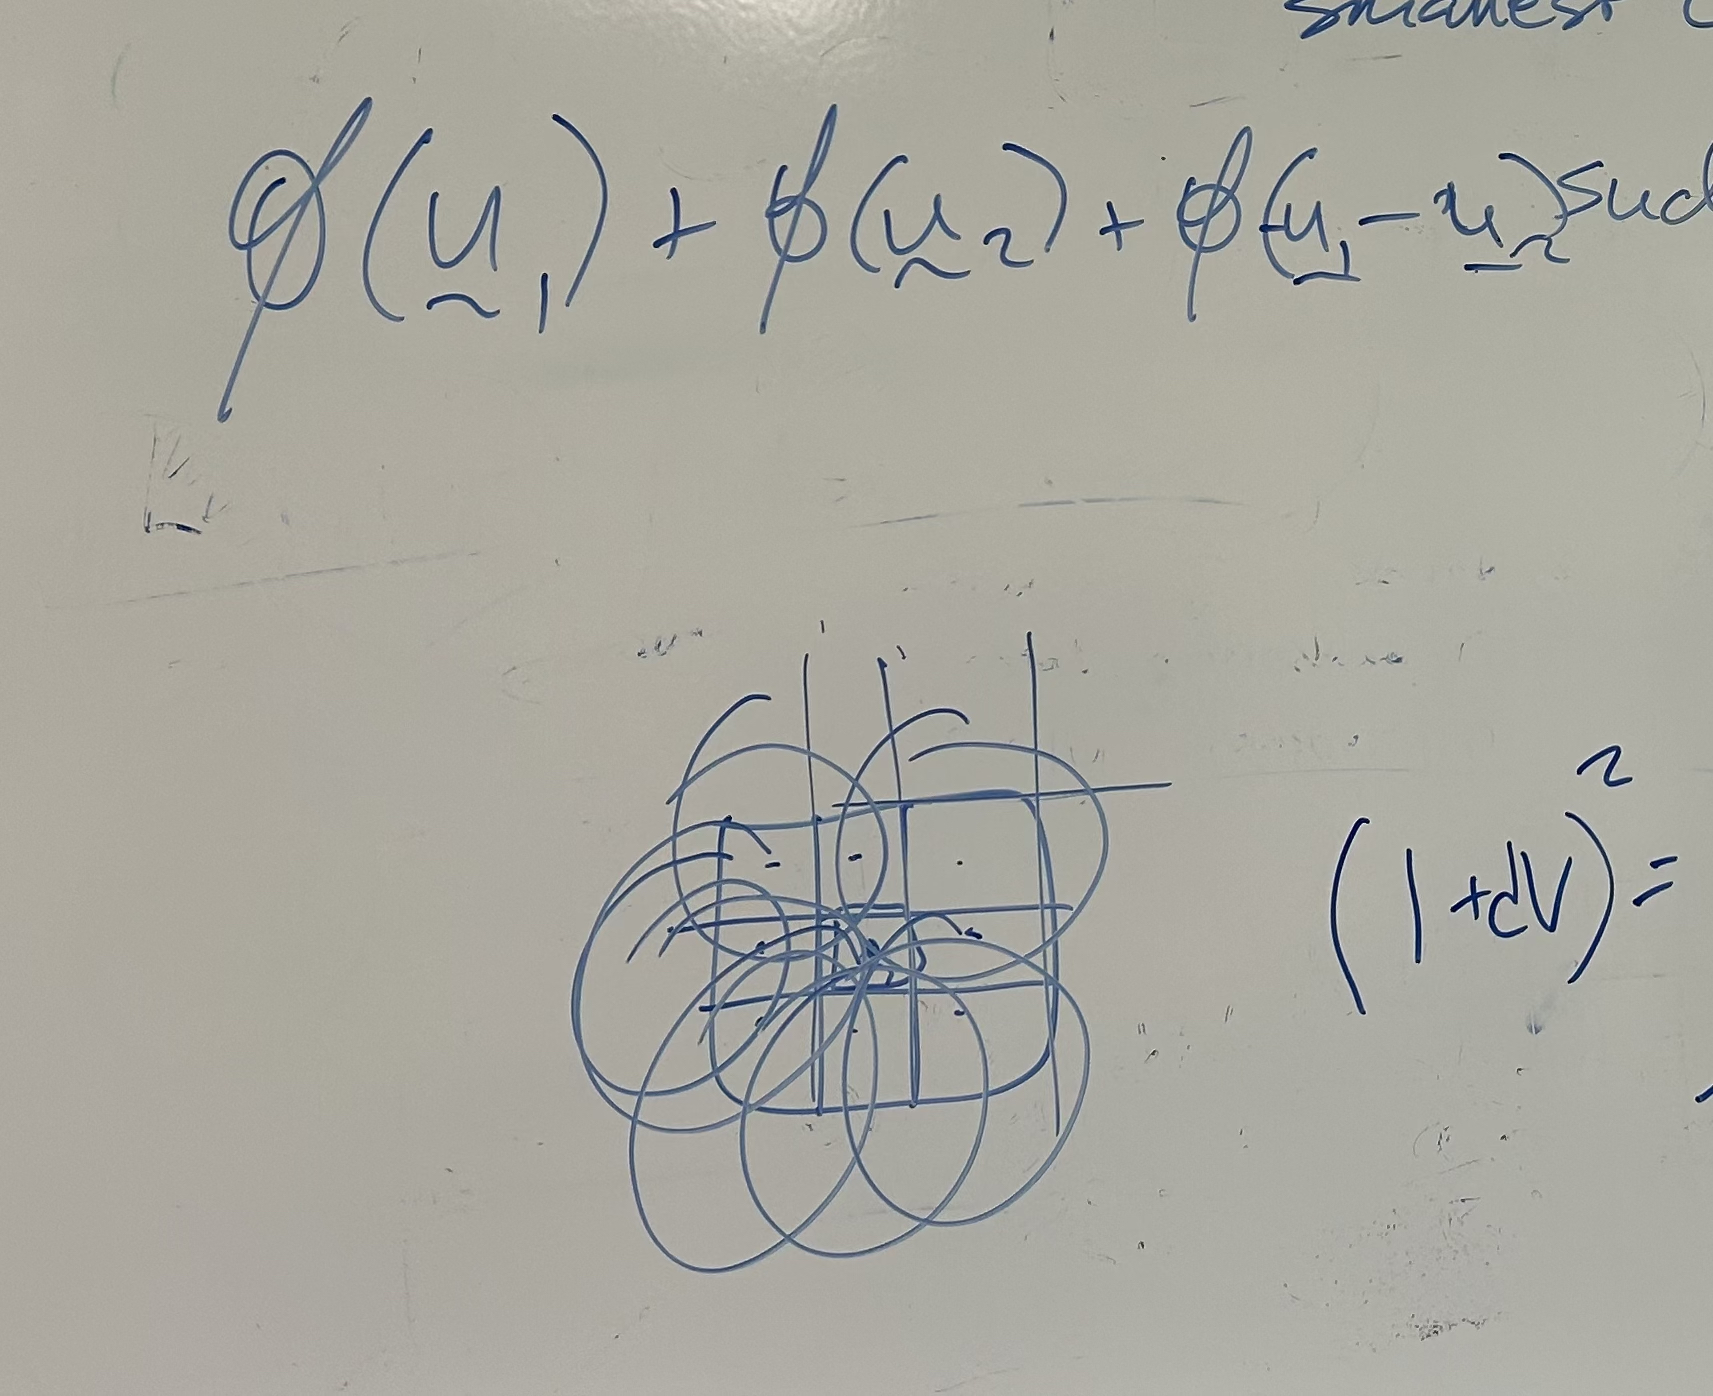 Partial equation and image on white board